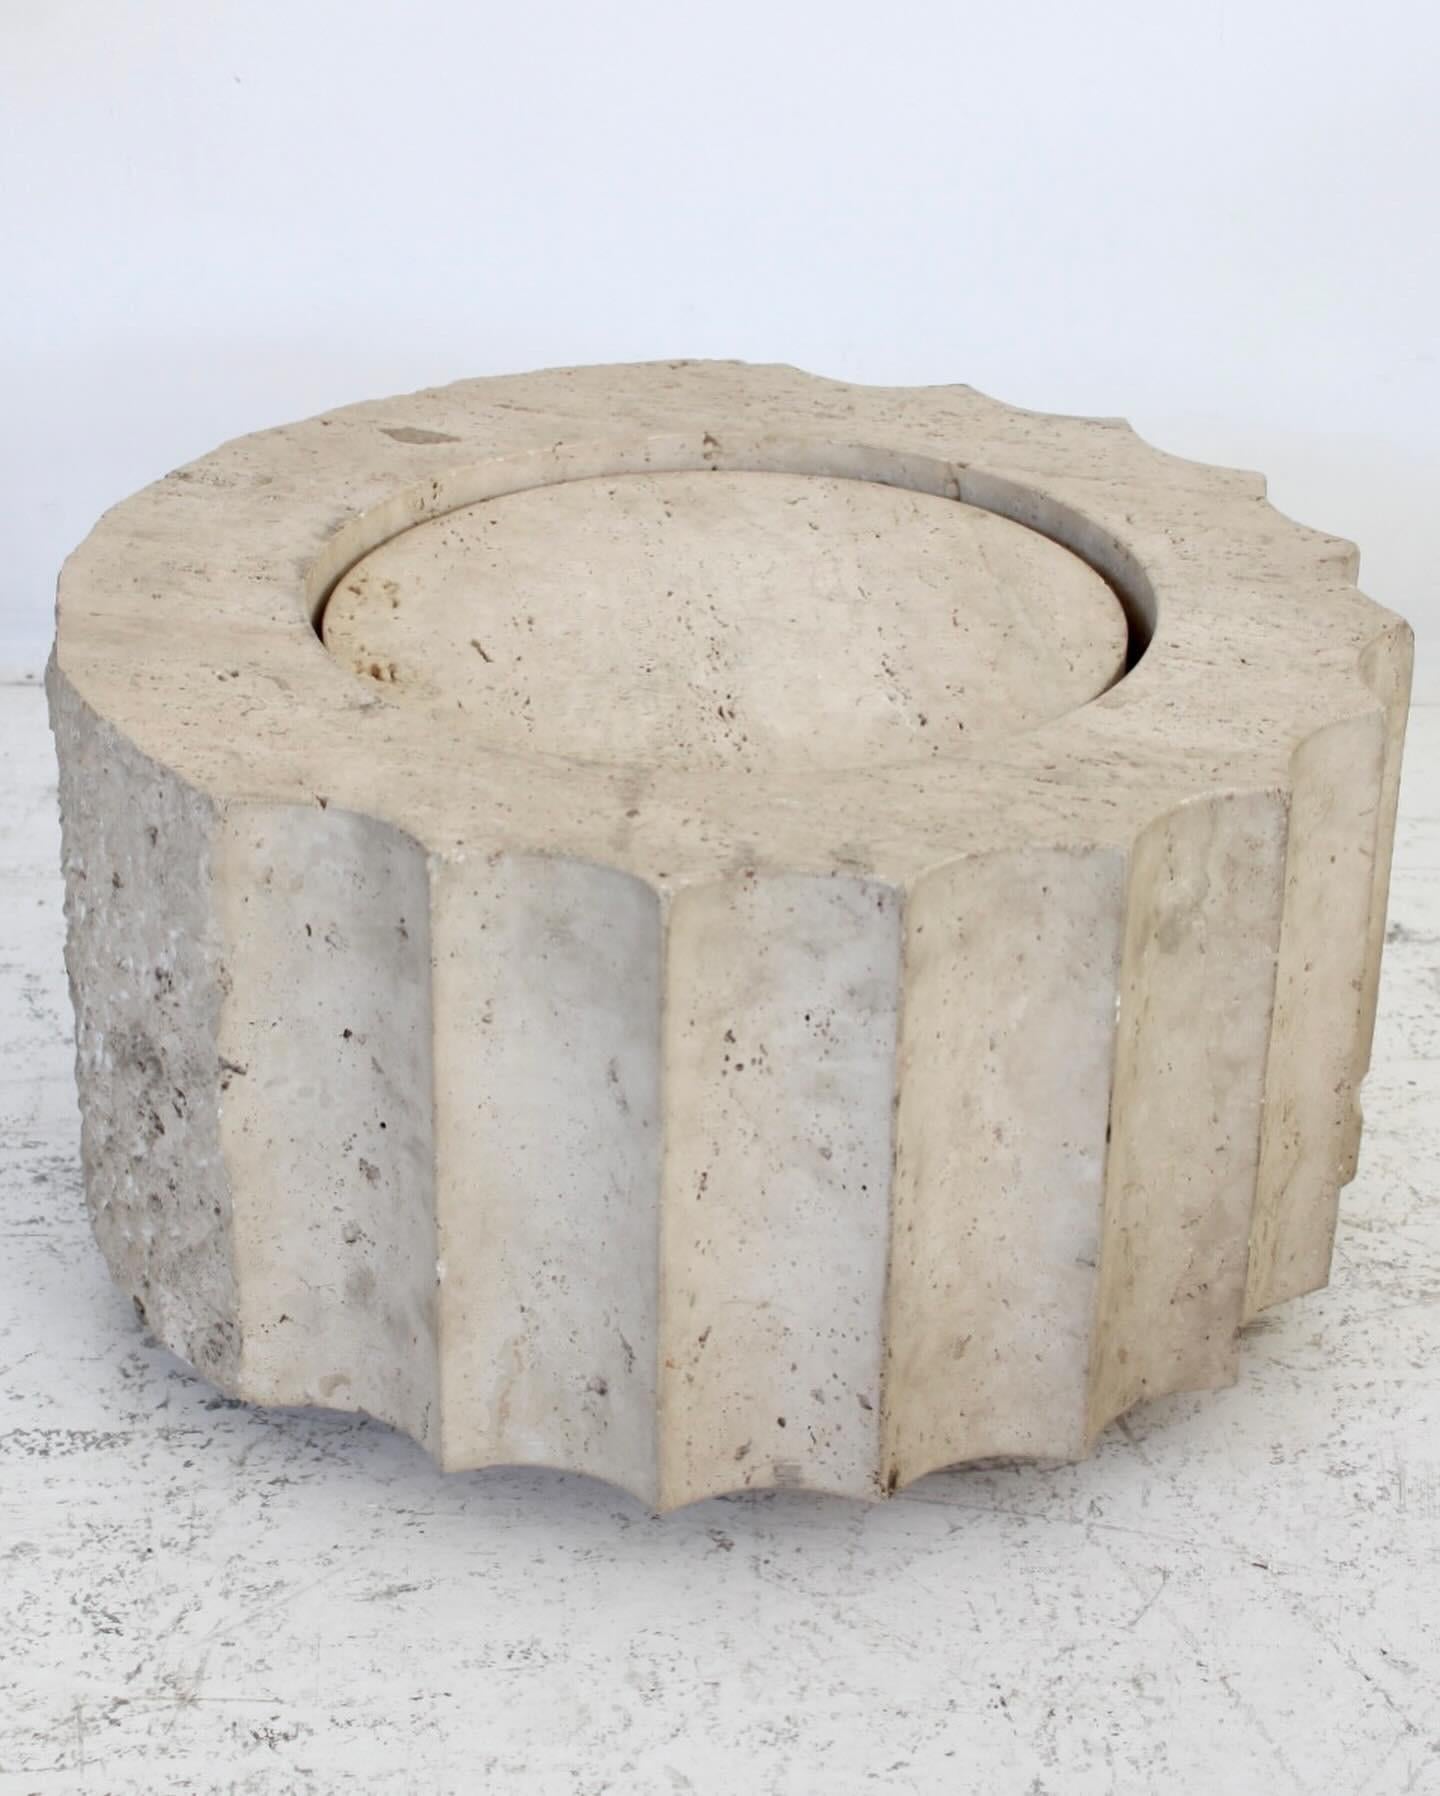 Hand carved Travertine marble fluted column side table. Origin France. The table is hand carved all around and then features a side that is purposely rough carved to appear as if the carver is in process. Almost a surrealist object. A piece unique.